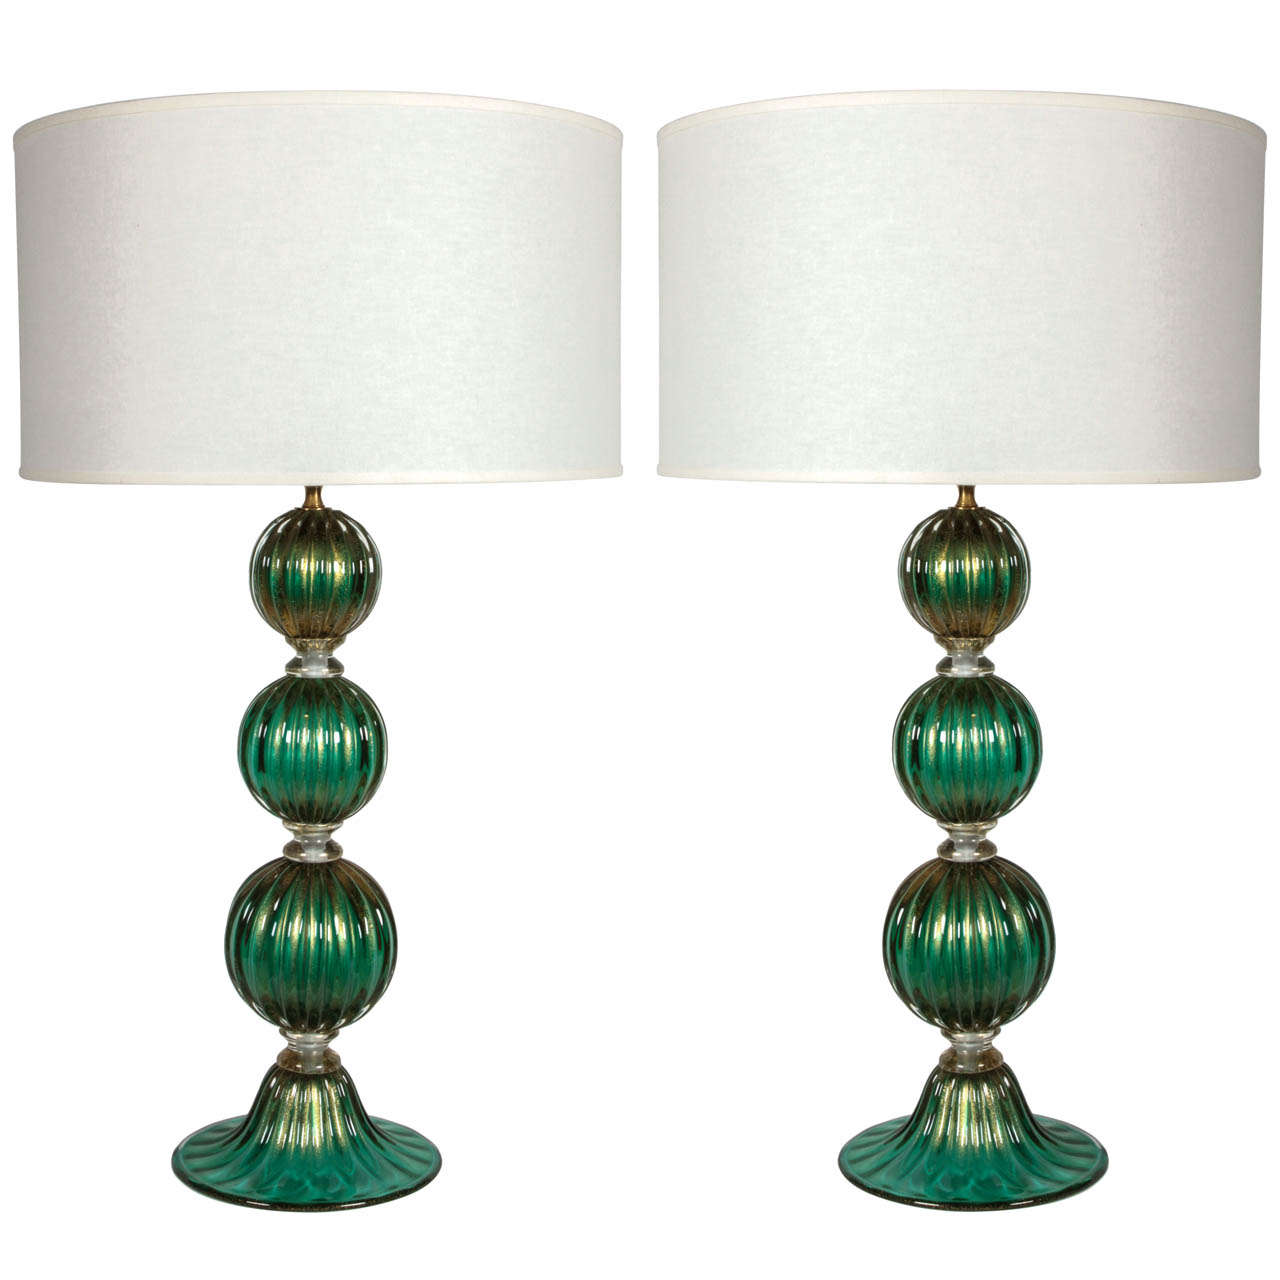 Pair of Emerald Green and 23k Gold Murano Glass Lamps